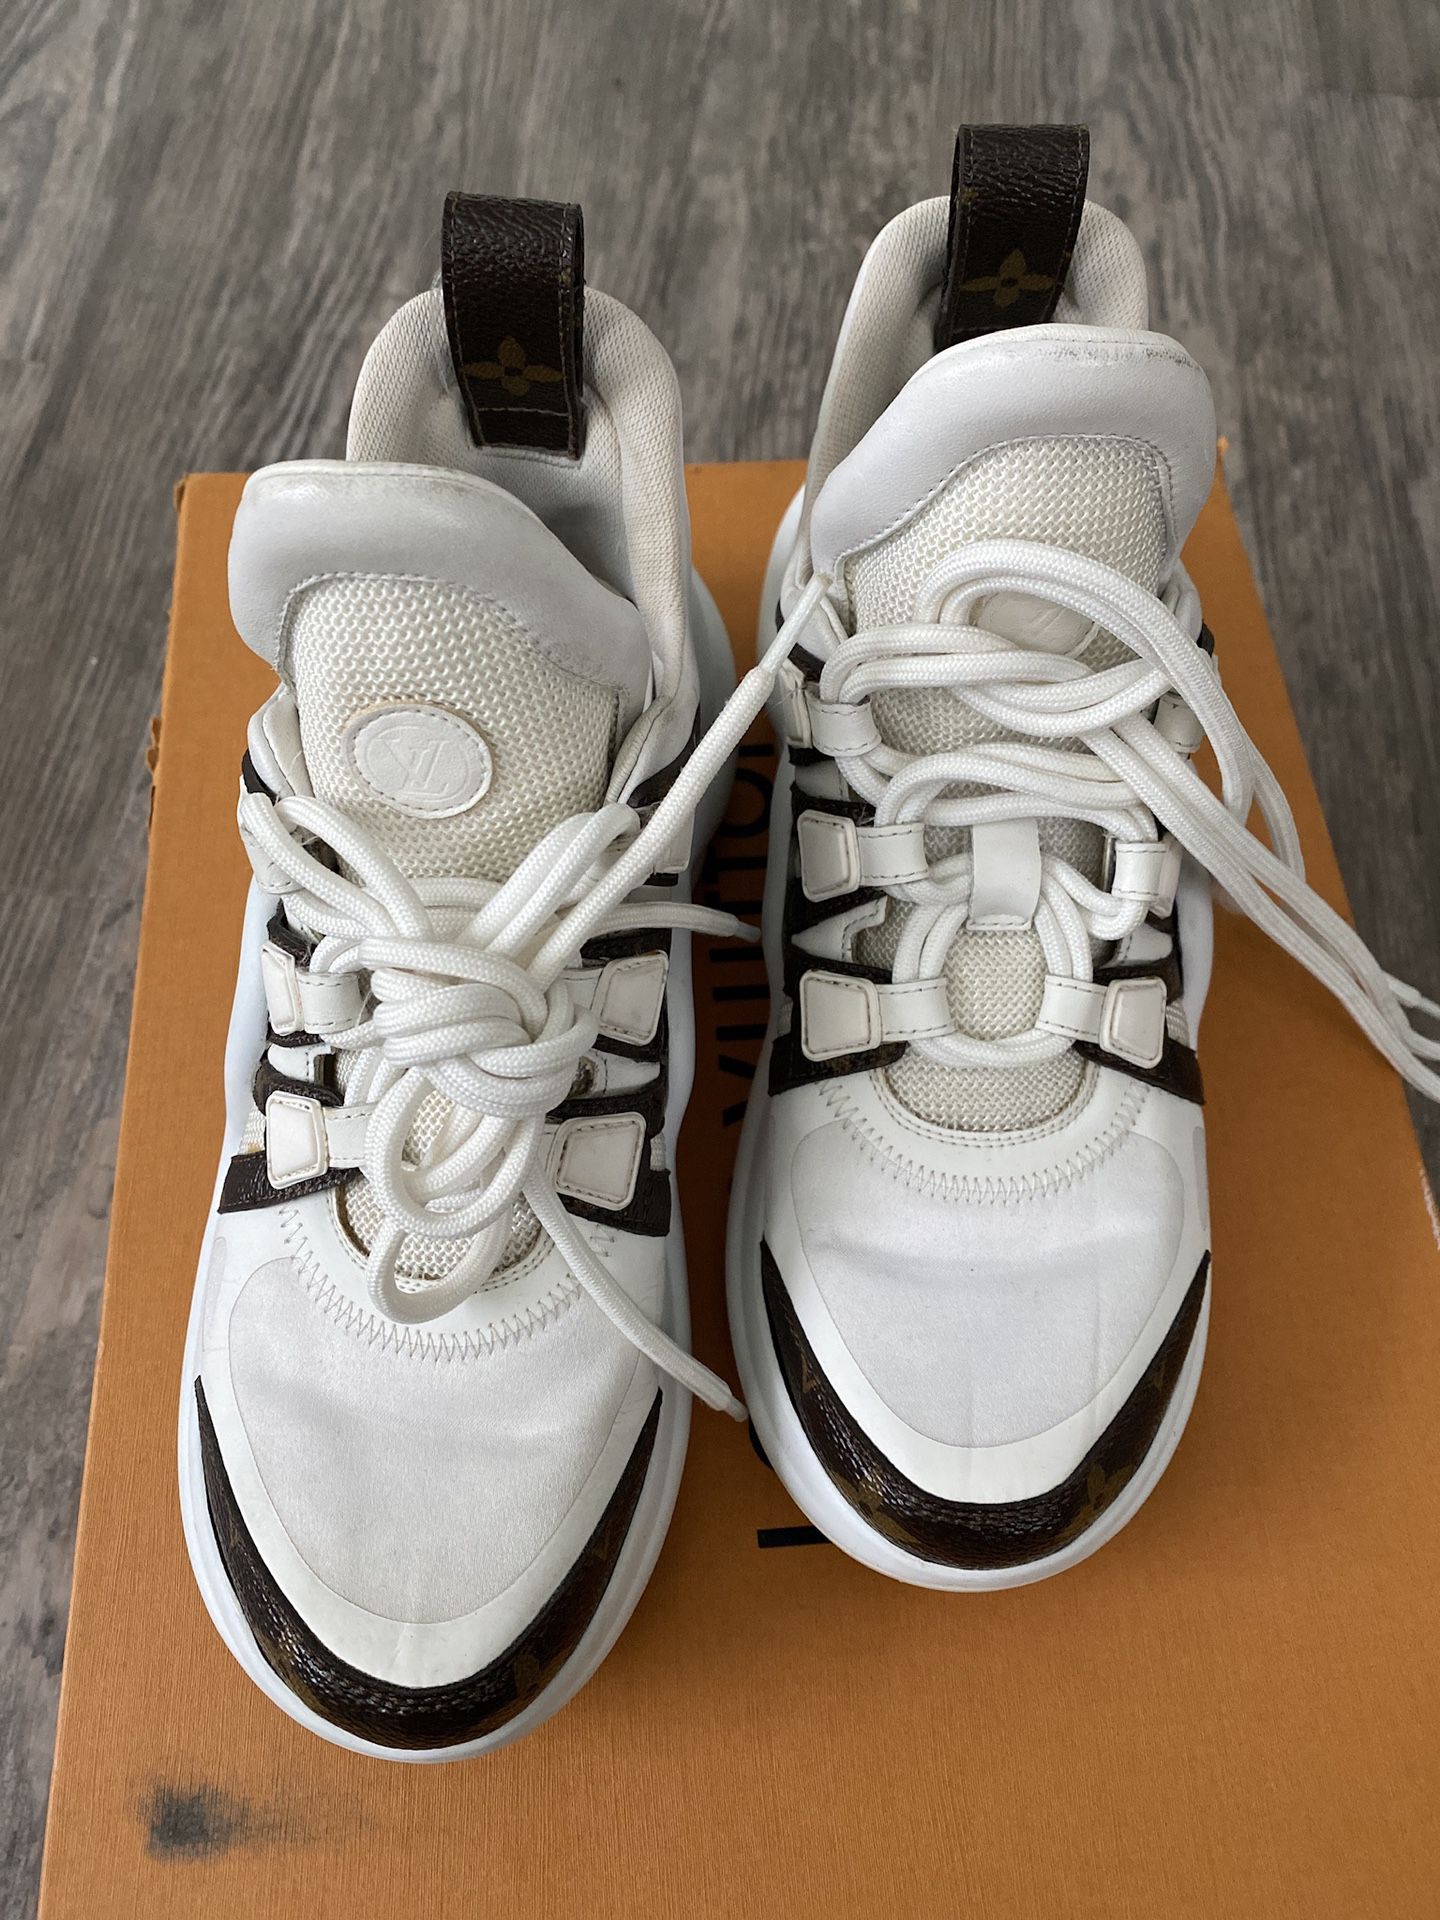 Louis Vuitton LV Archlight Sneakers Lace Up Trainer Shoe 35 Brown US 5